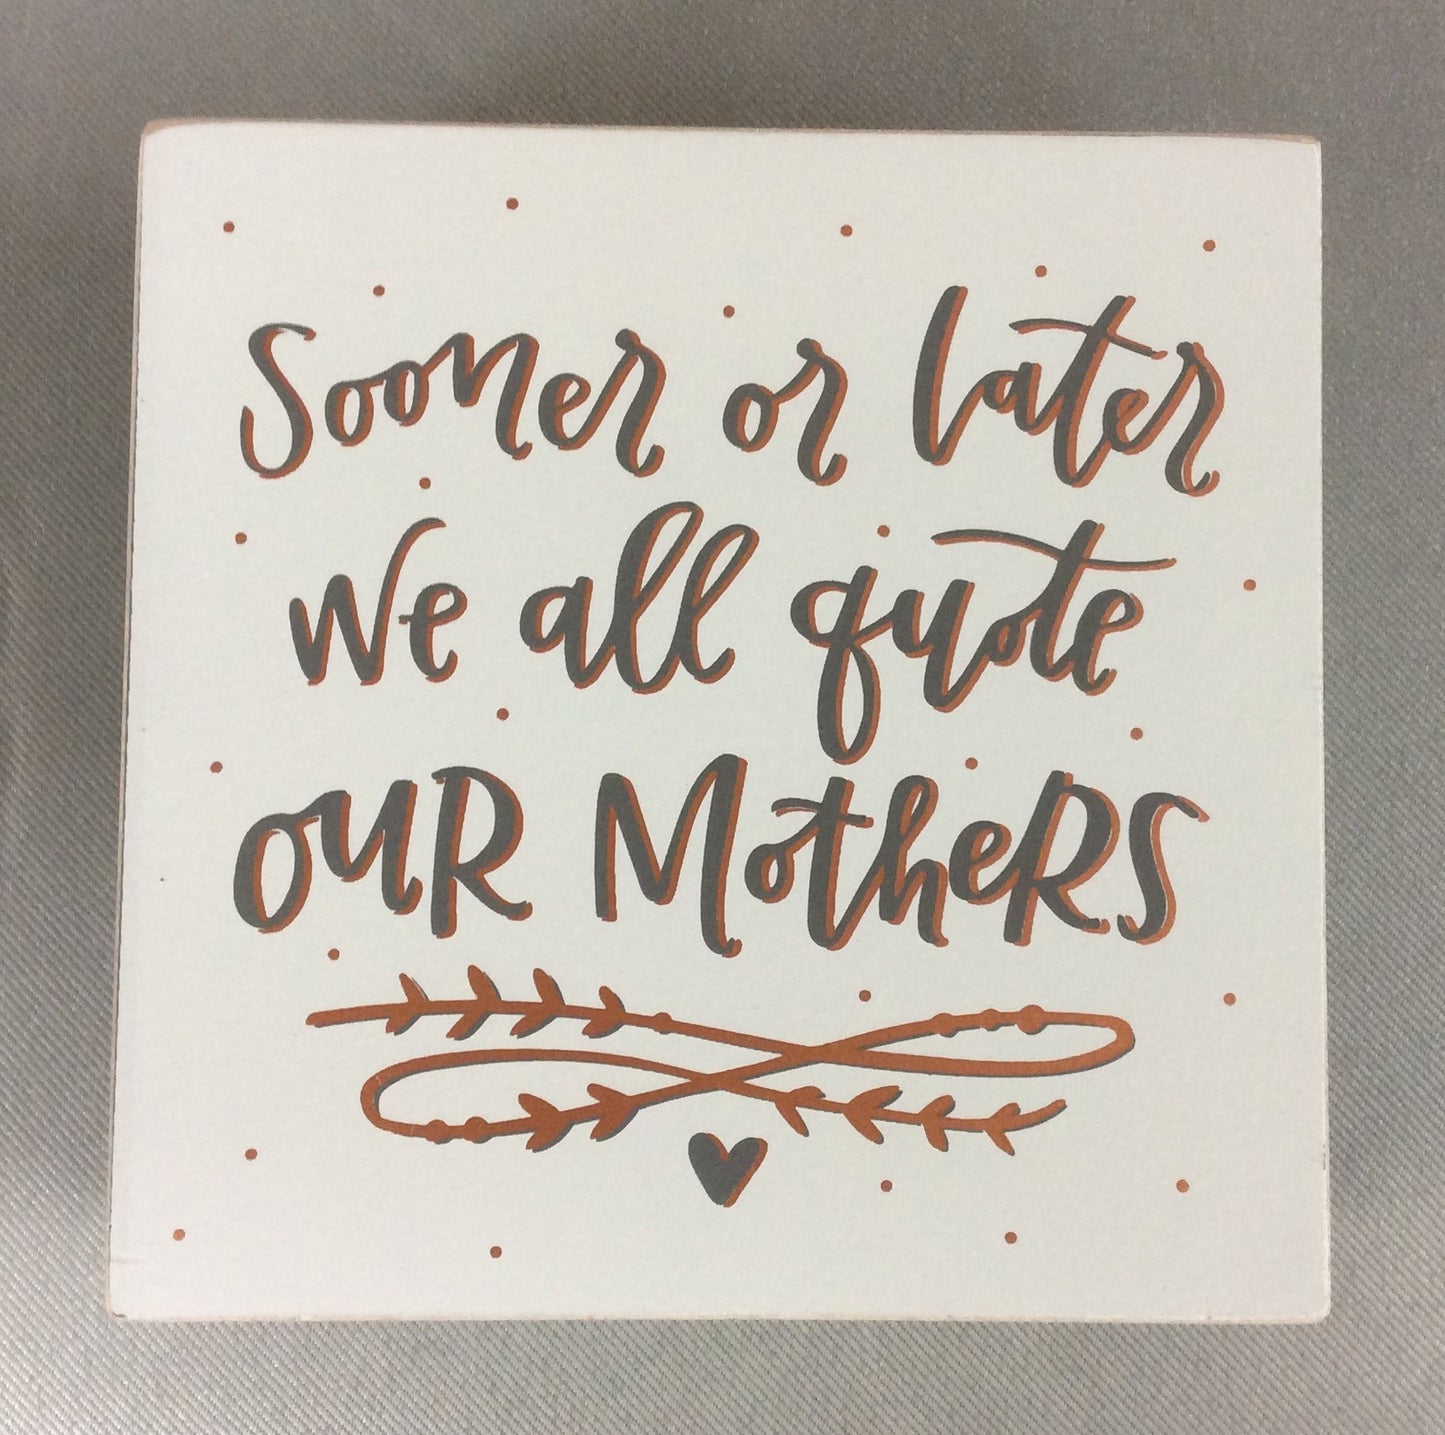 "QUOTE OUR MOTHER" BOX SIGN